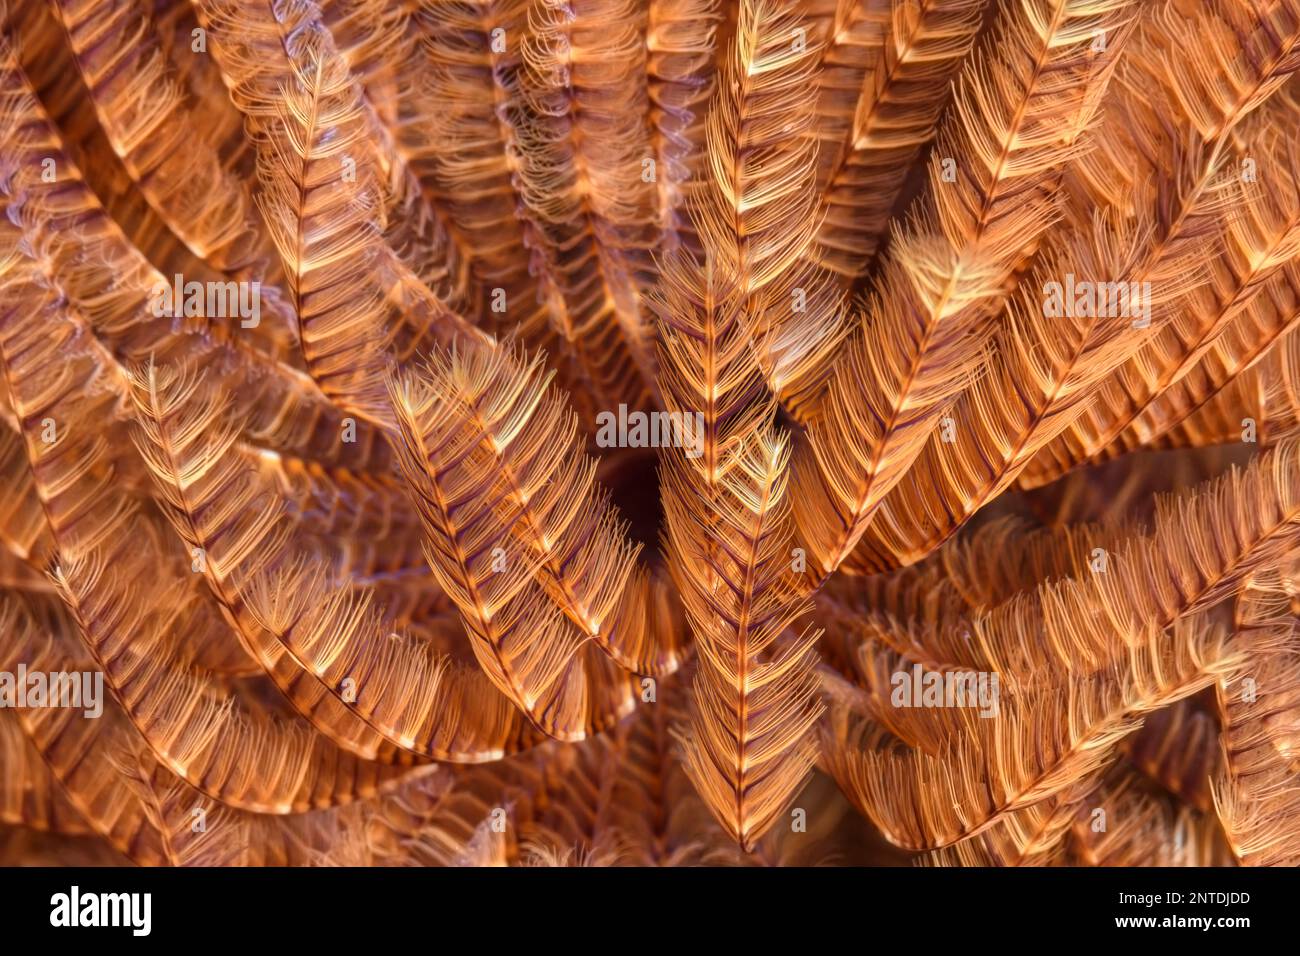 Radioles of a Feather Duster Worm, Sabellastarte sp., Tulamben, Bali, Indonesia, Pacific Stock Photo